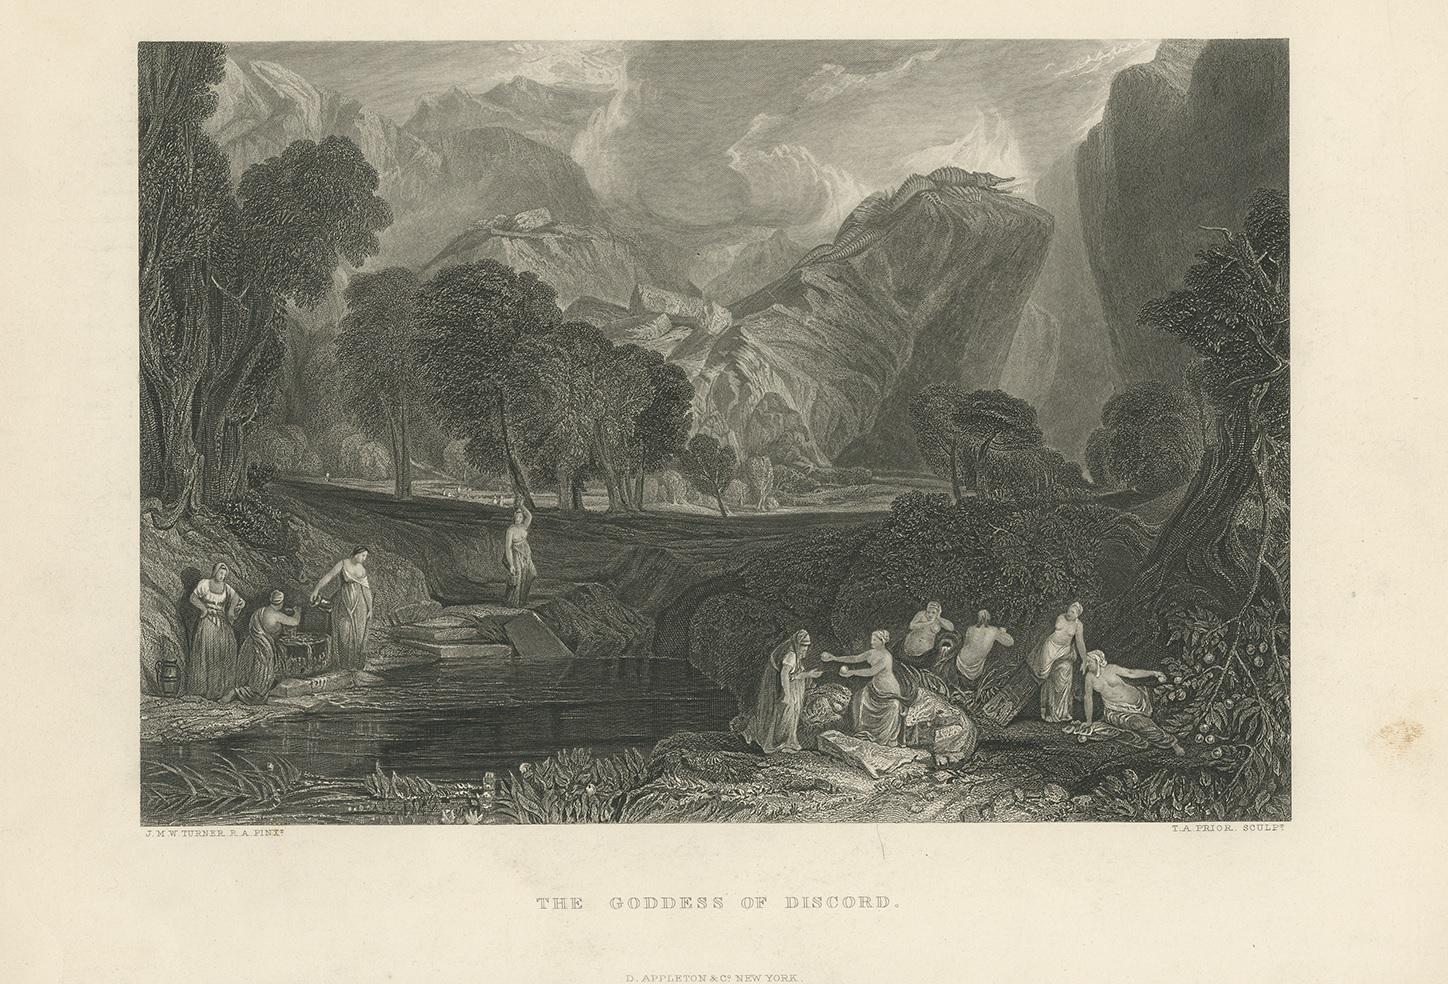 Antique print titled 'The Goddess of Discord'. Set within the Garden of the Hesperides, several women are seen tending the golden apple trees. To the right, the Goddess of Discord, Eris, is shown picking an apple. The same apple was later awarded to